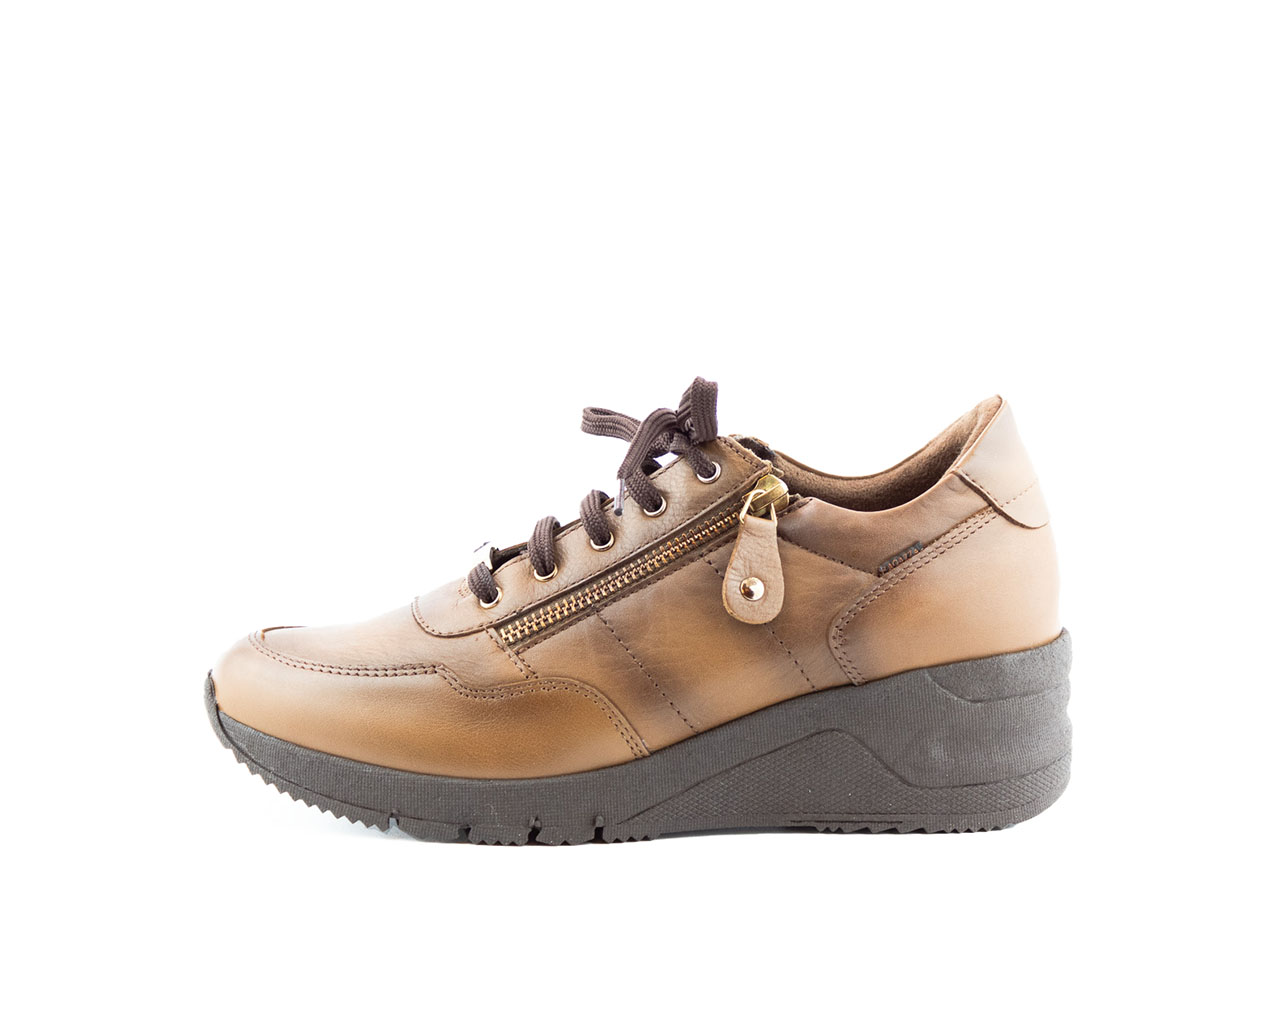 opportunity Genuine Suffocate Ragazza Sneakers 0208 Tampa - Giannakouras Shoes